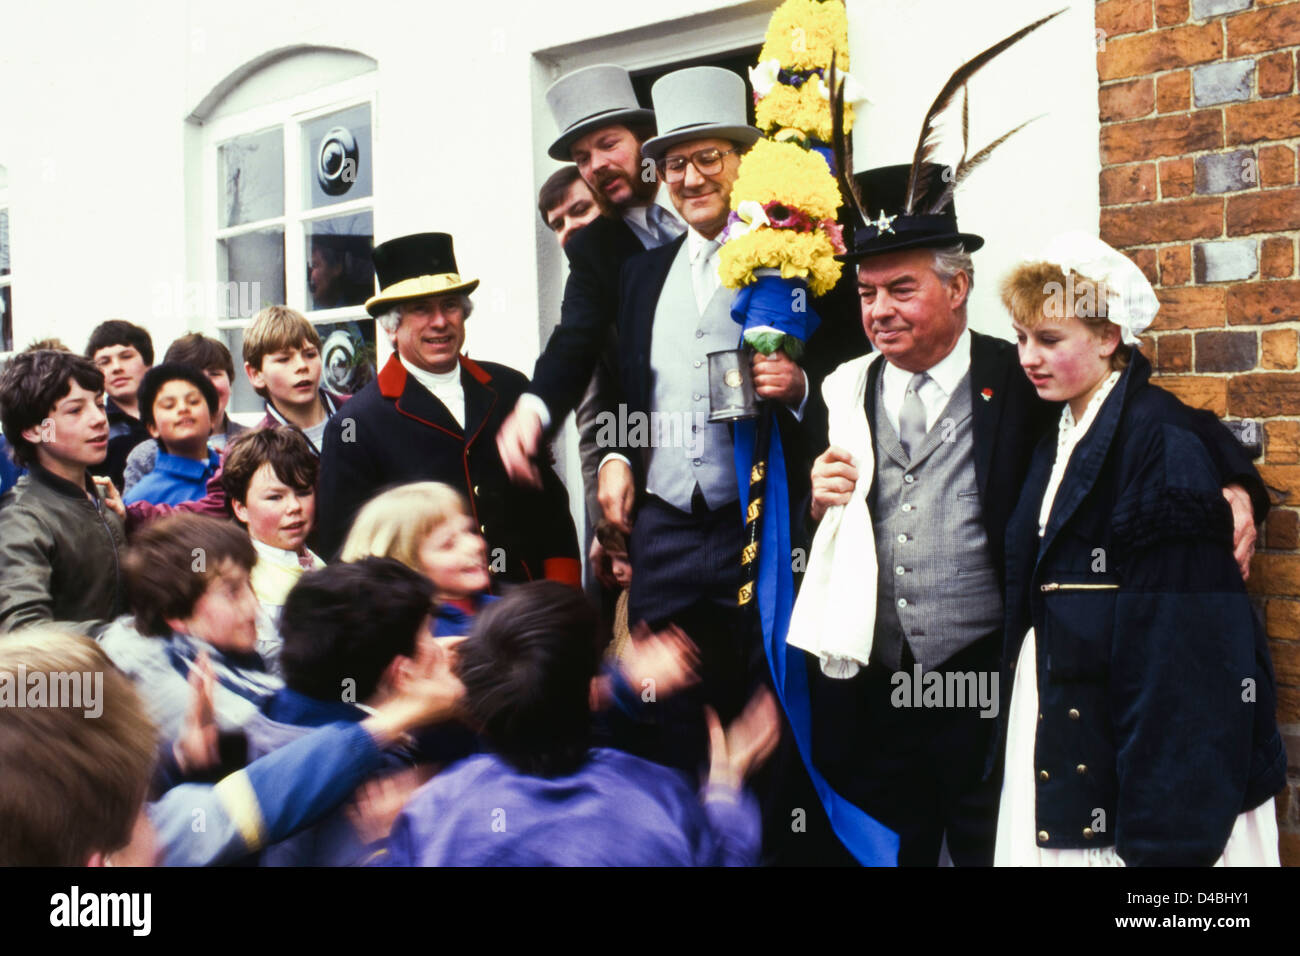 A pathway is made through group of children for the Tuttimen & Orangeman by scattering money Hocktide Ceremony annual custom celebrated at Hungerford Berkshire England UK Stock Photo